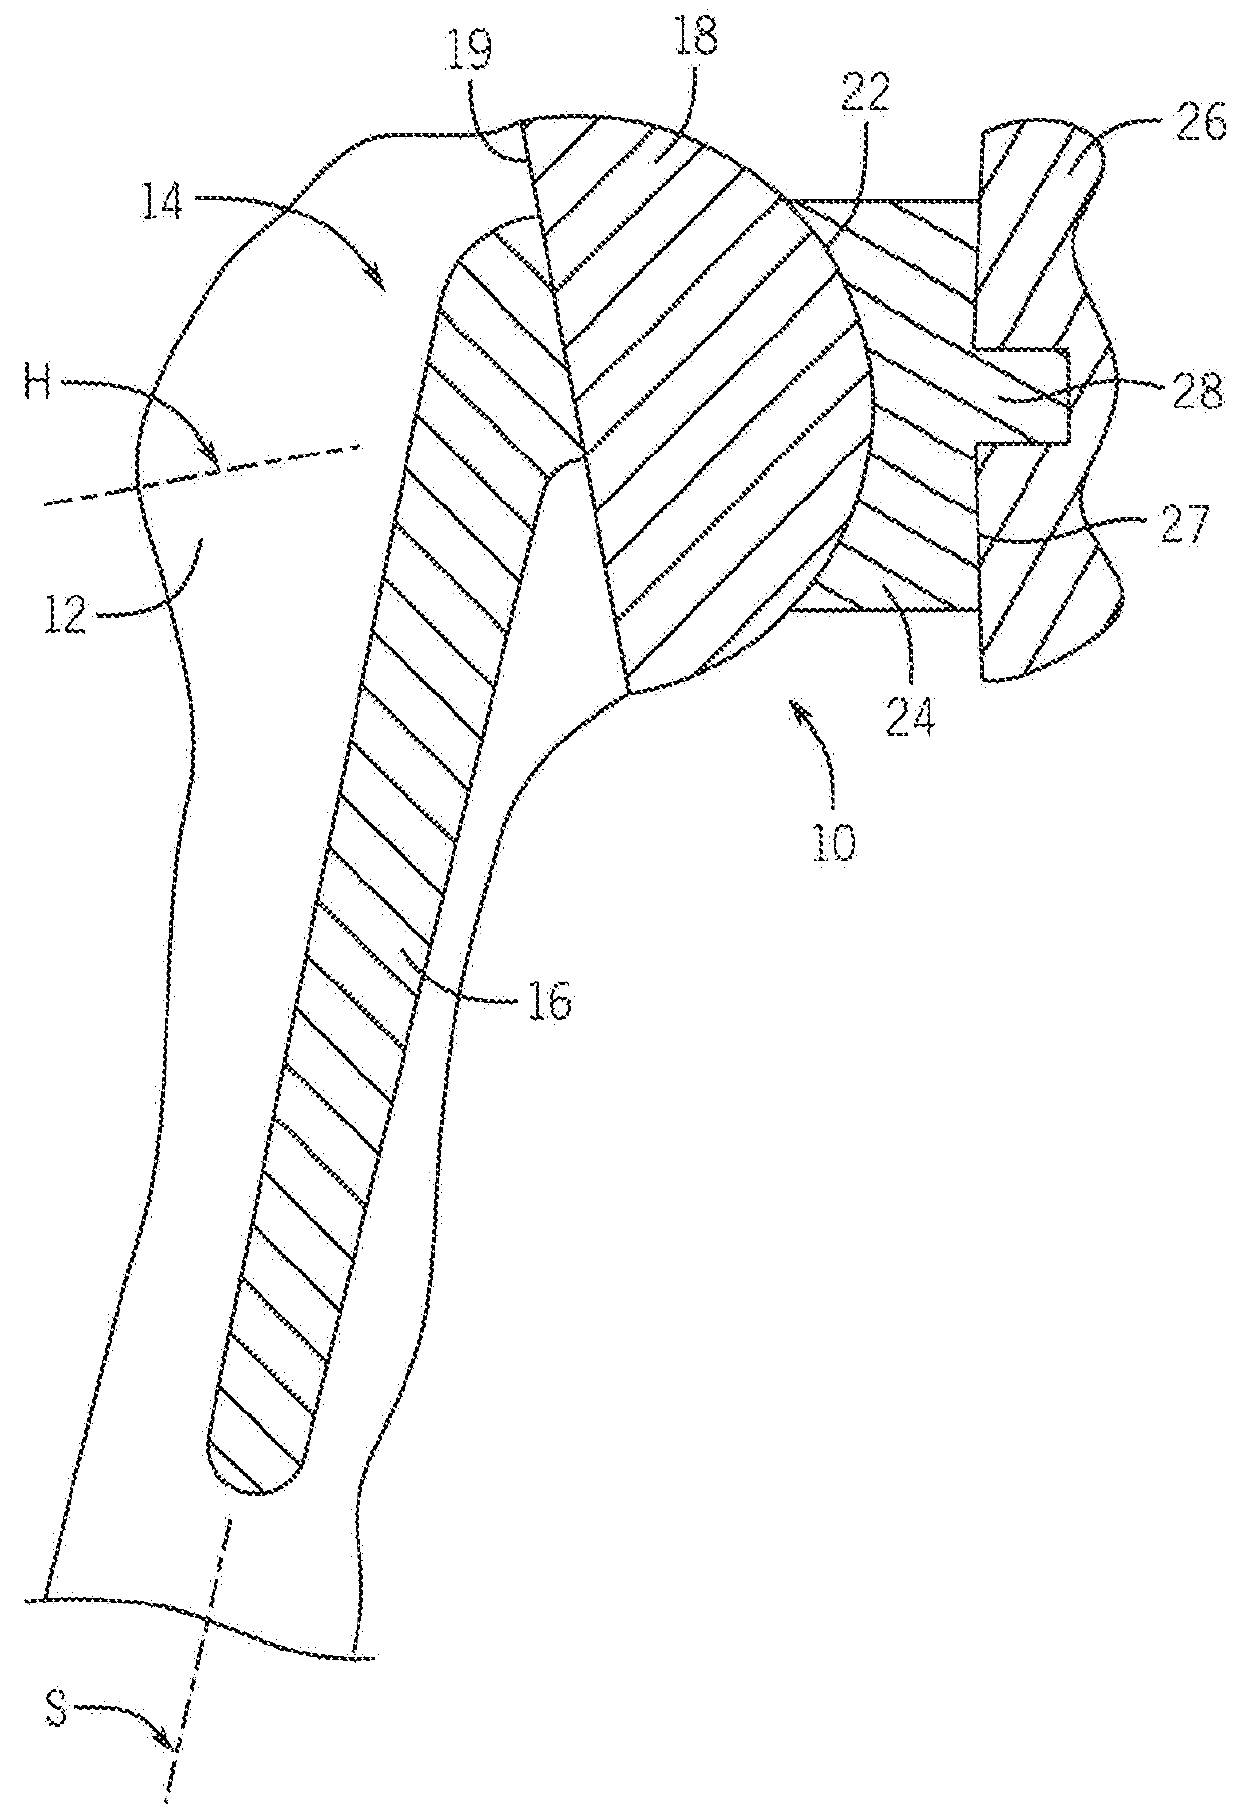 Shoulder Prosthesis With Variable Inclination Humeral Head Component